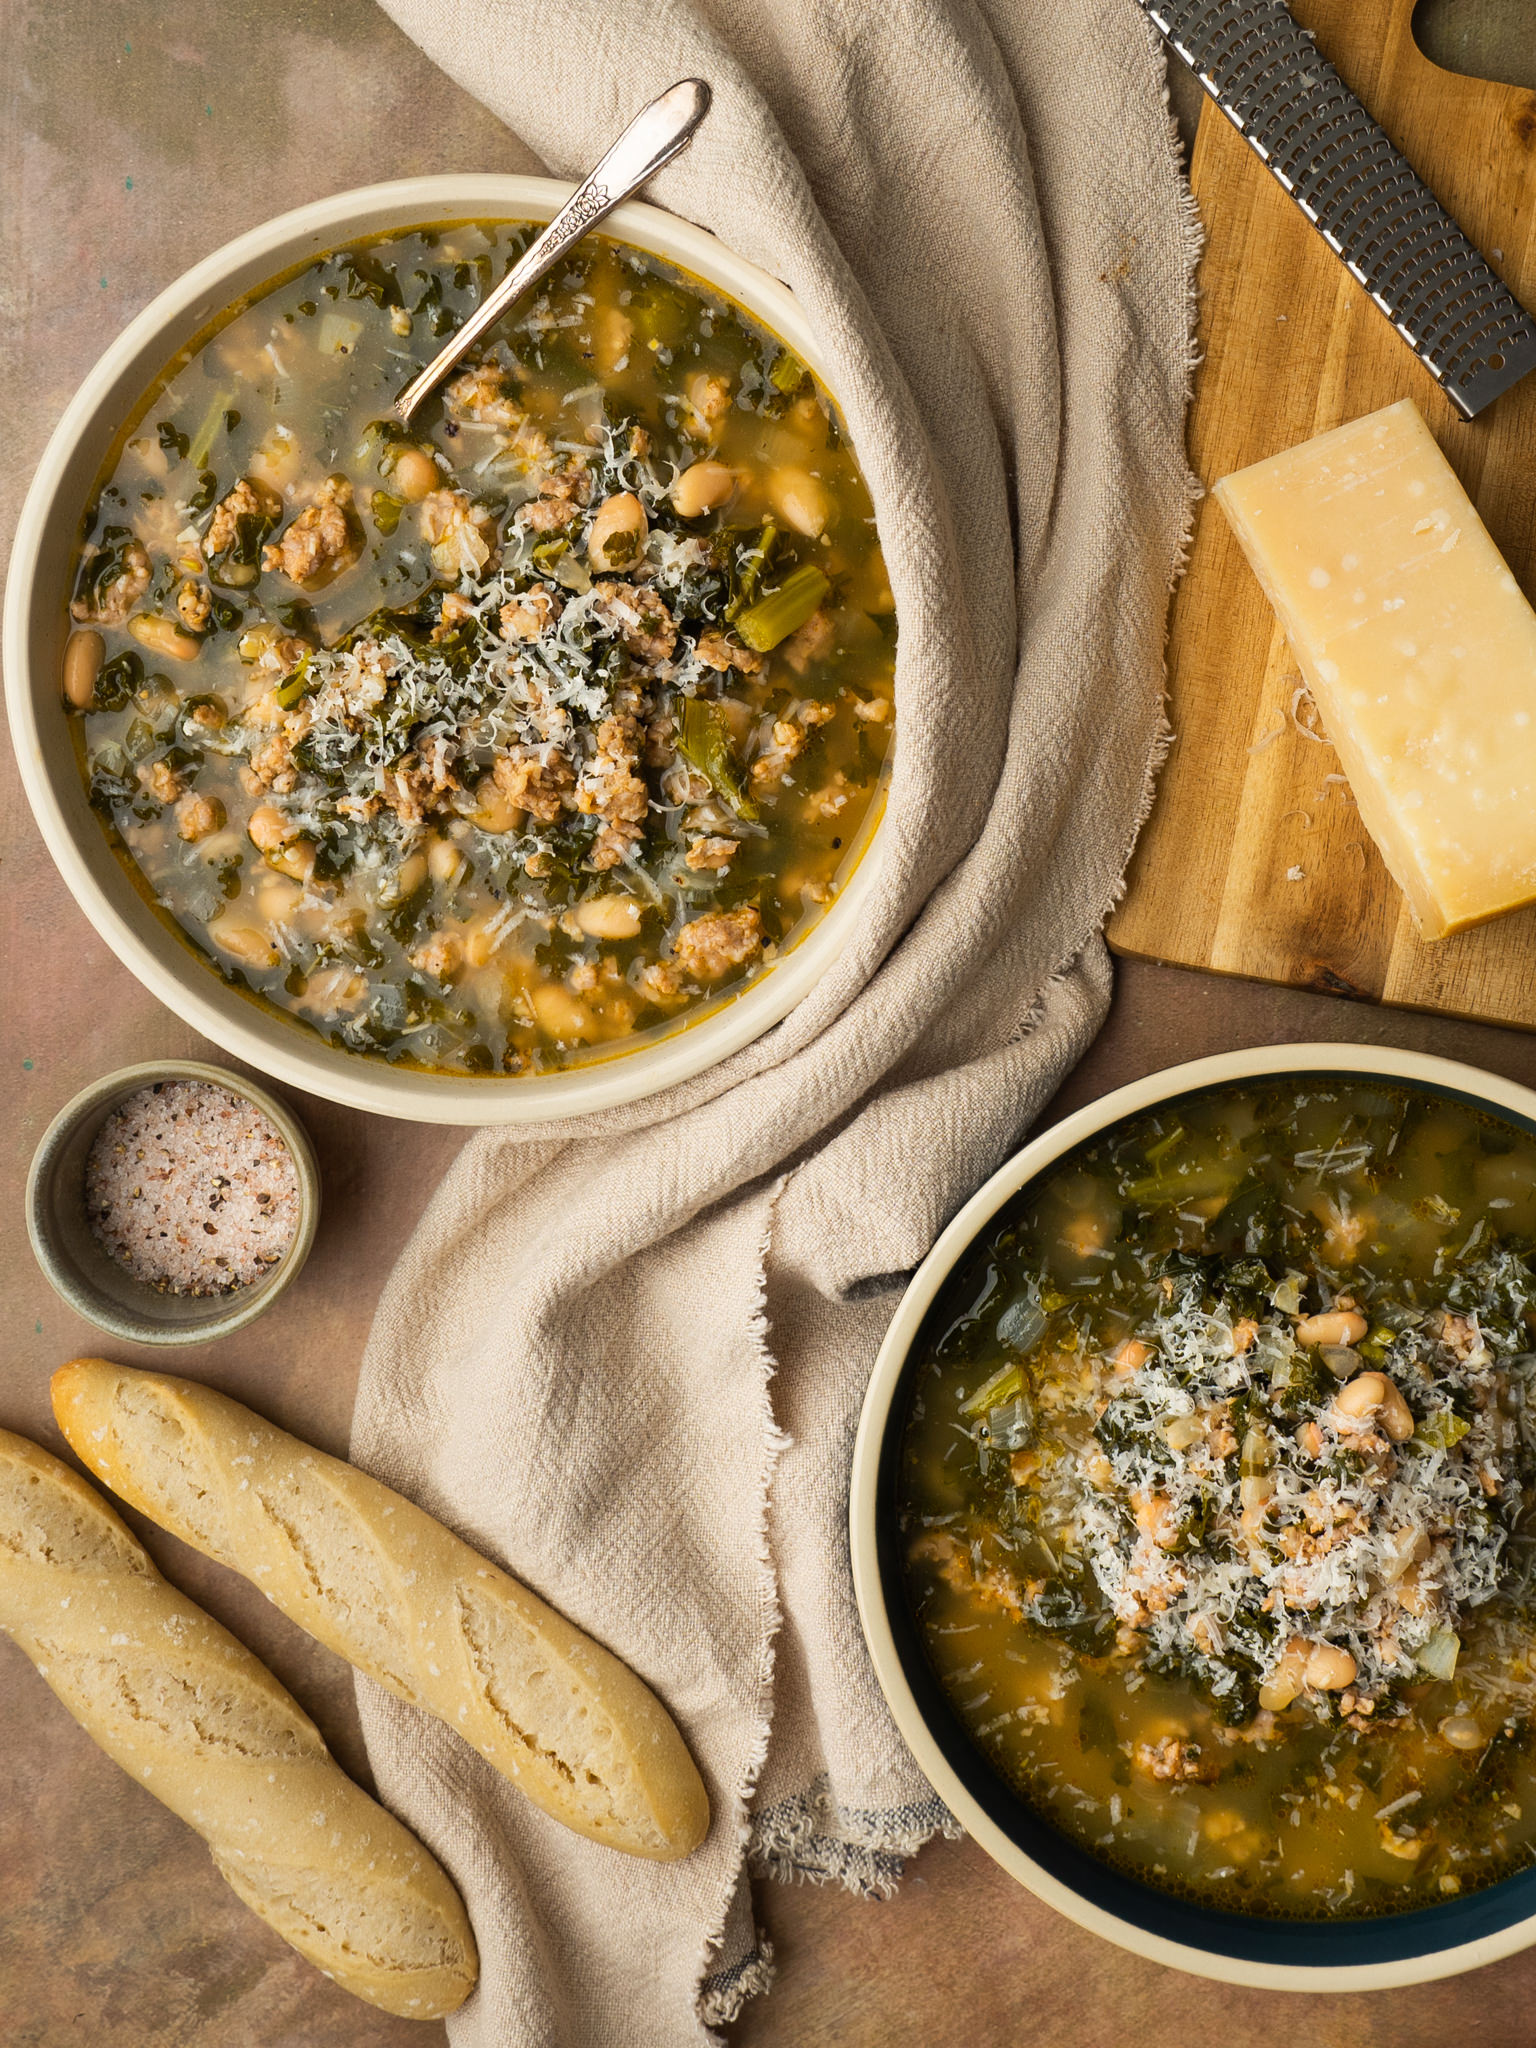 White bean and kale soup served with bread and parmesan cheese